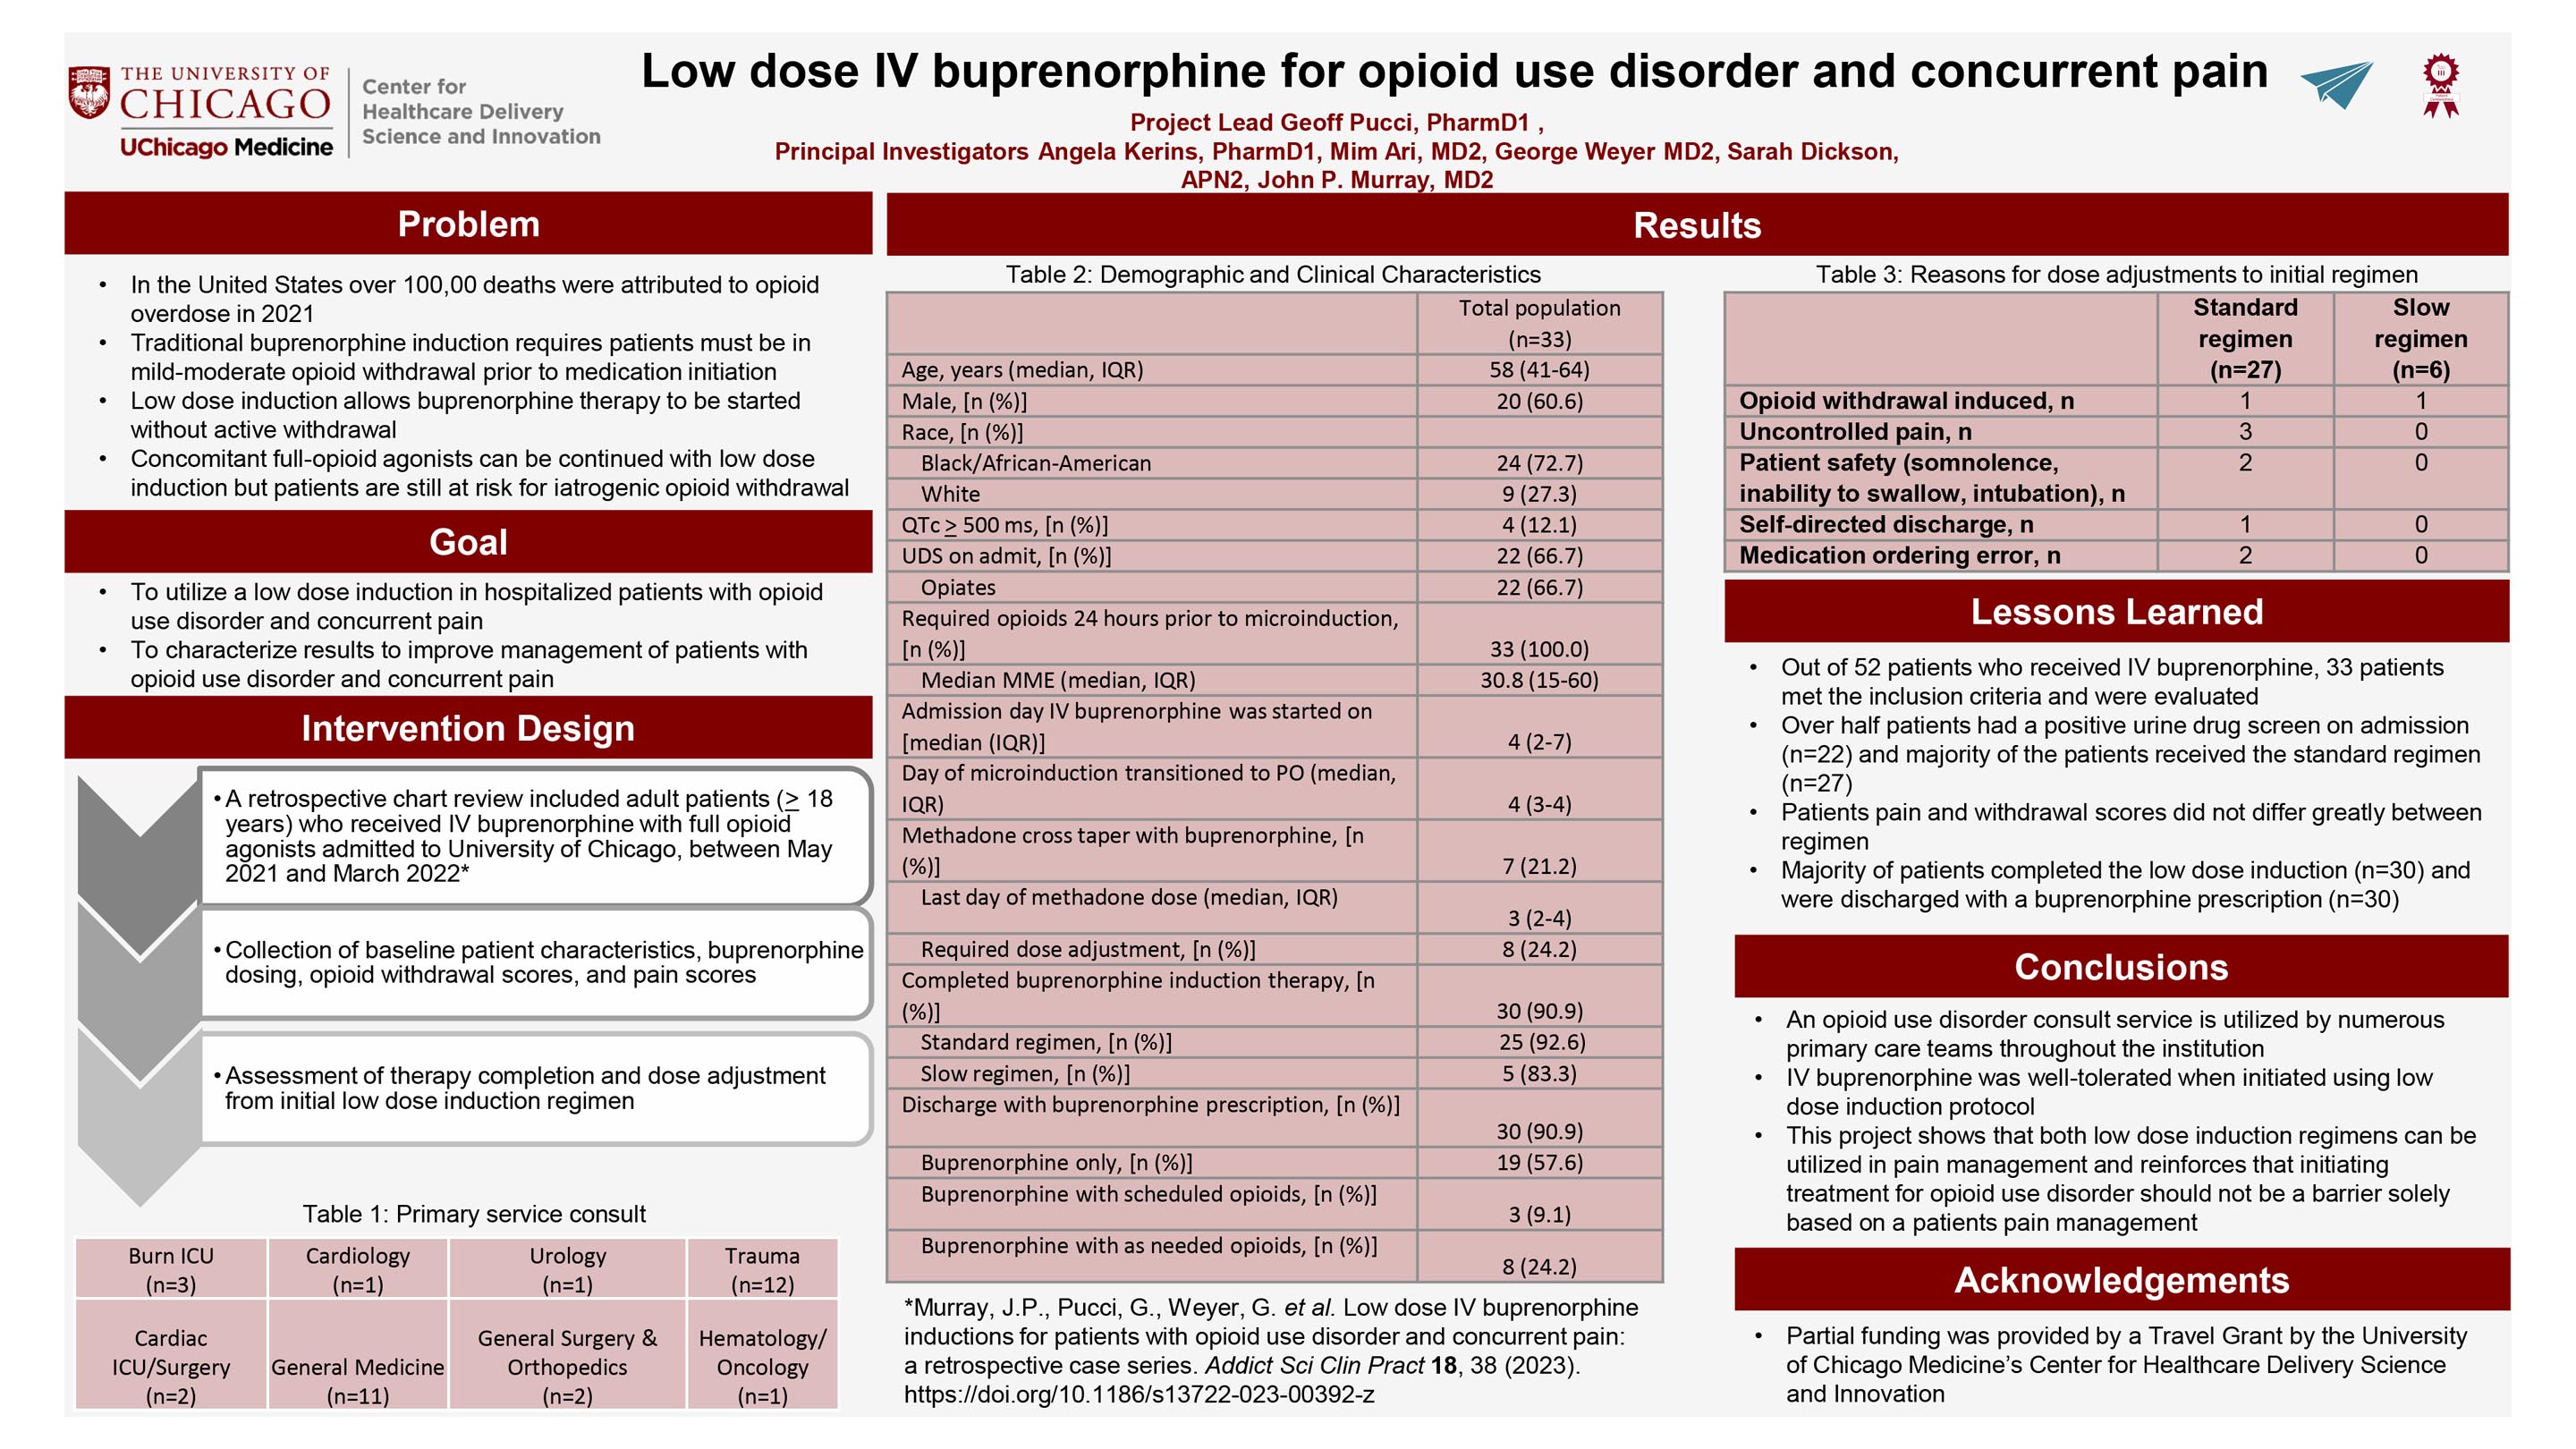 PUCCI_Low dose IV buprenorphine for opioid use disorder and concurrent pain